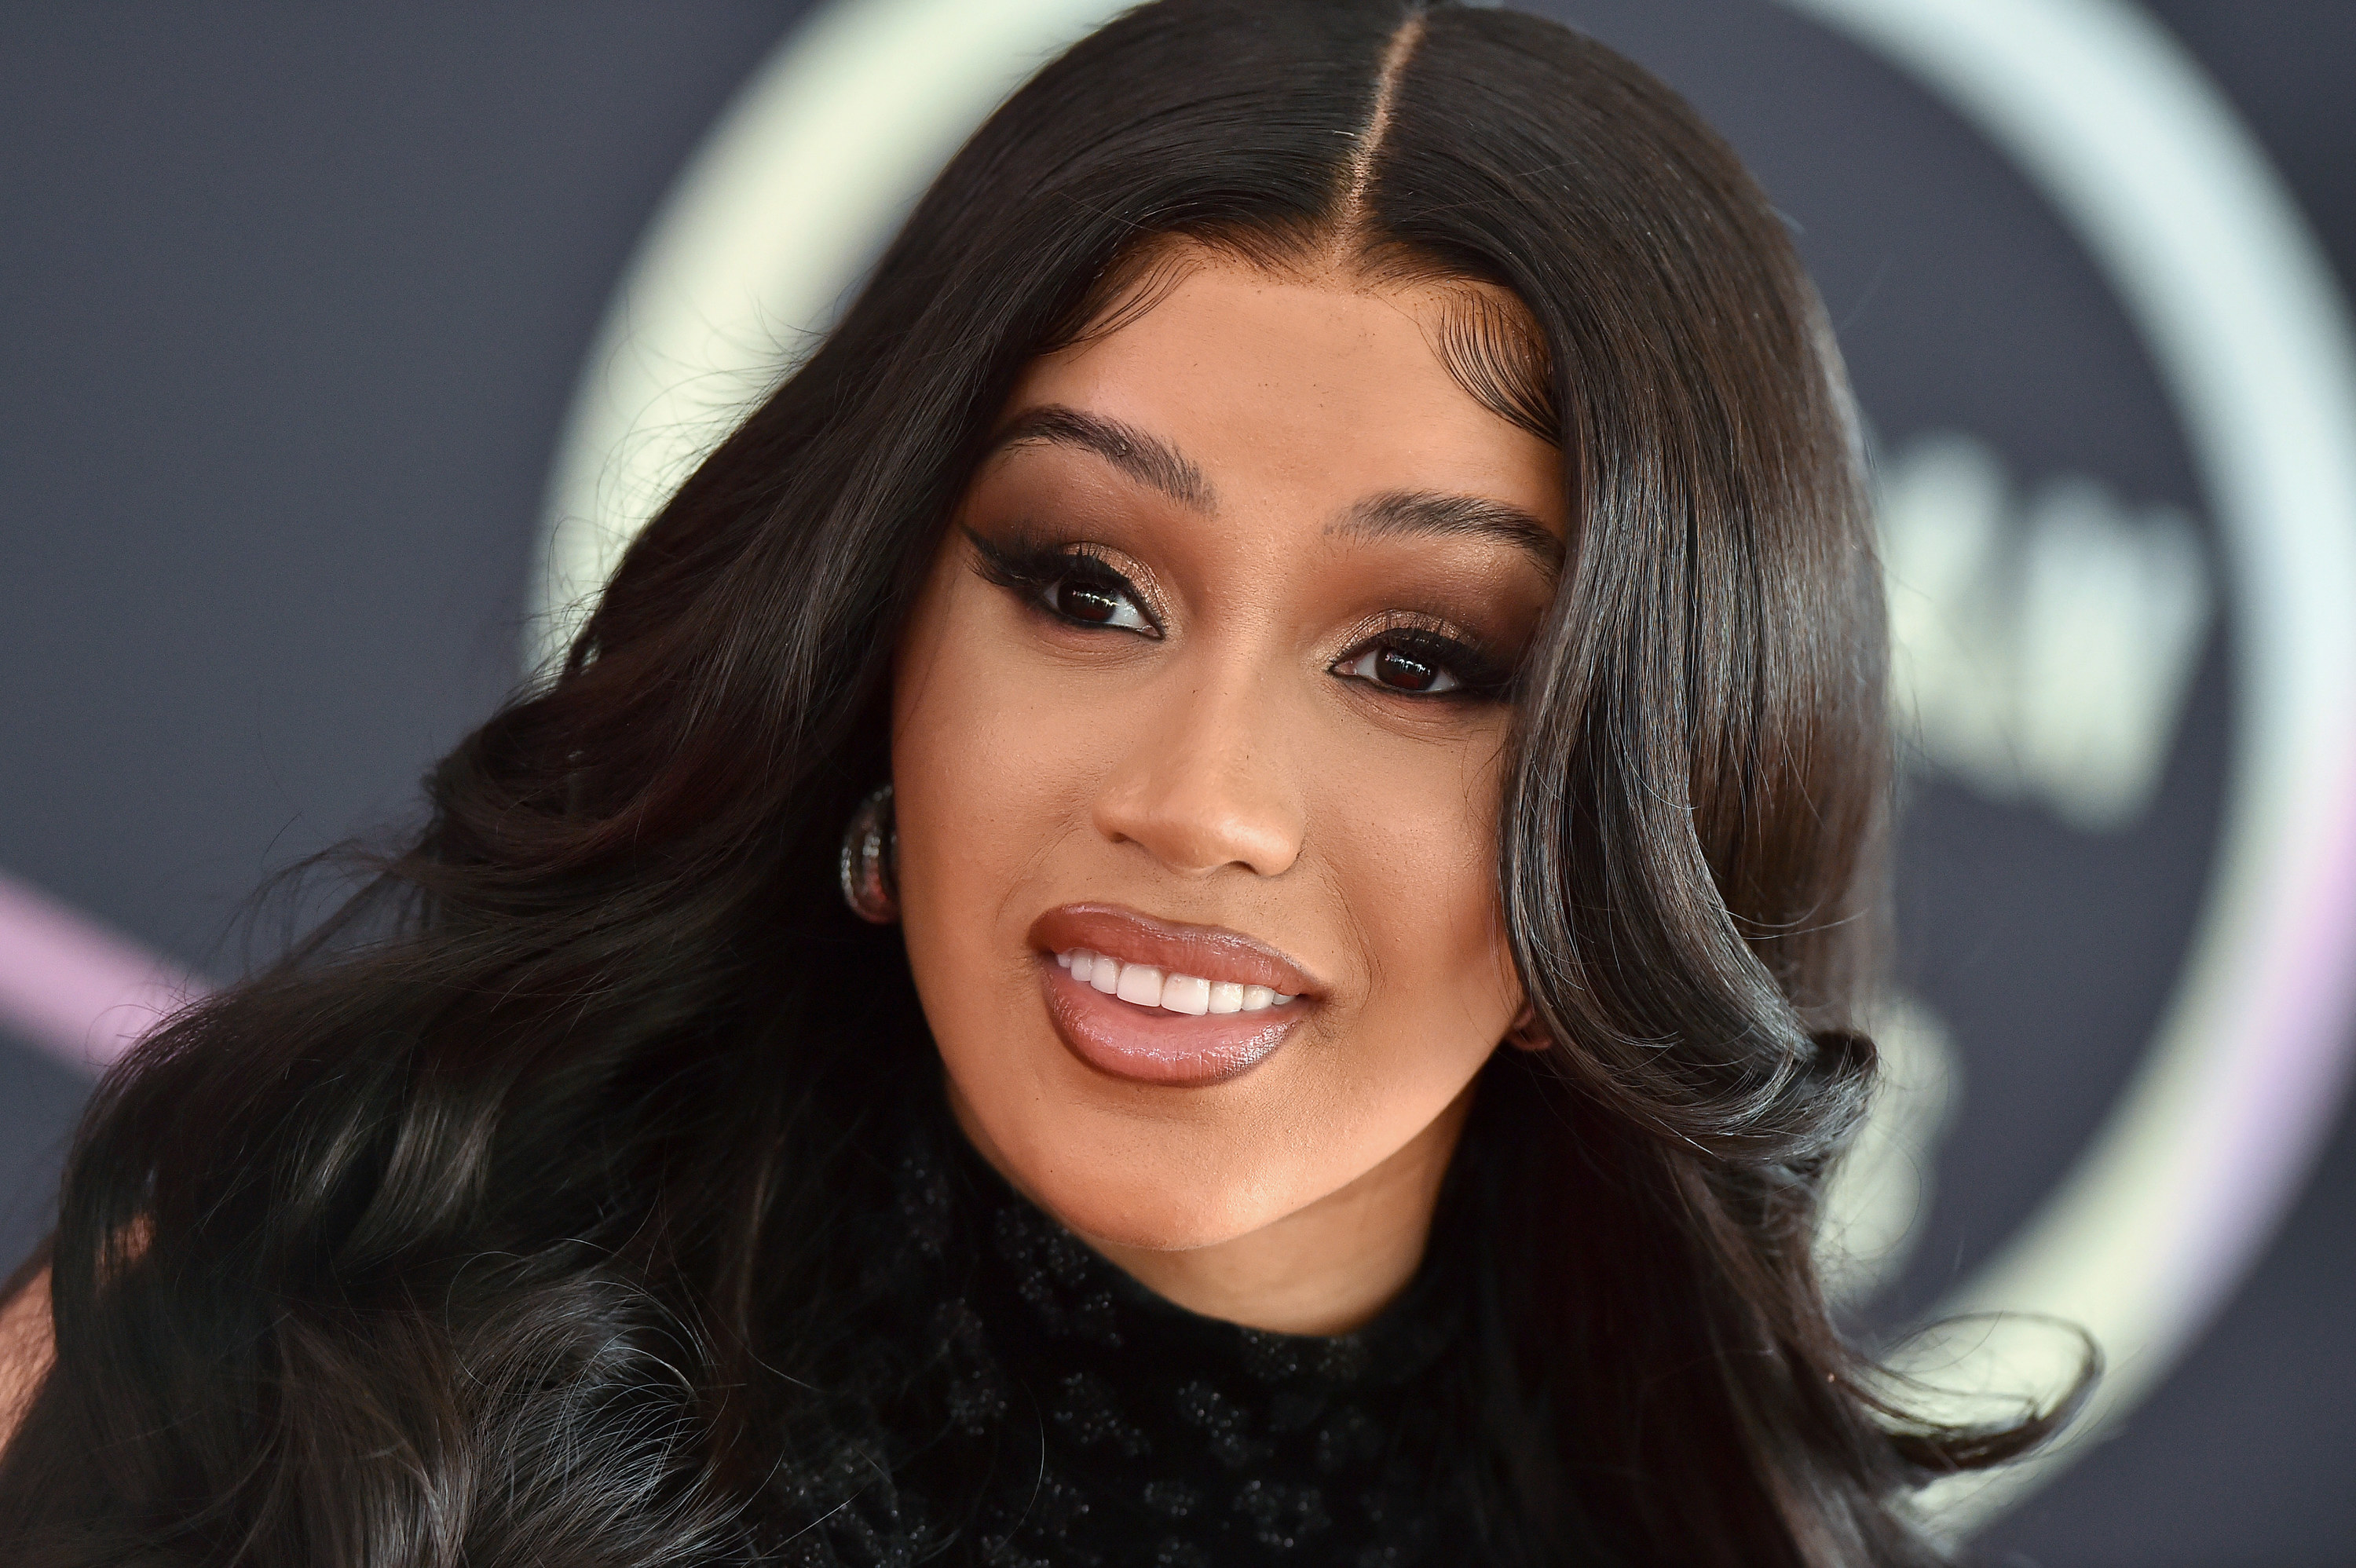 Cardi B poses on the red carpet for the 2021 American Music Awards on November 19, 2021 in Los Angeles, California